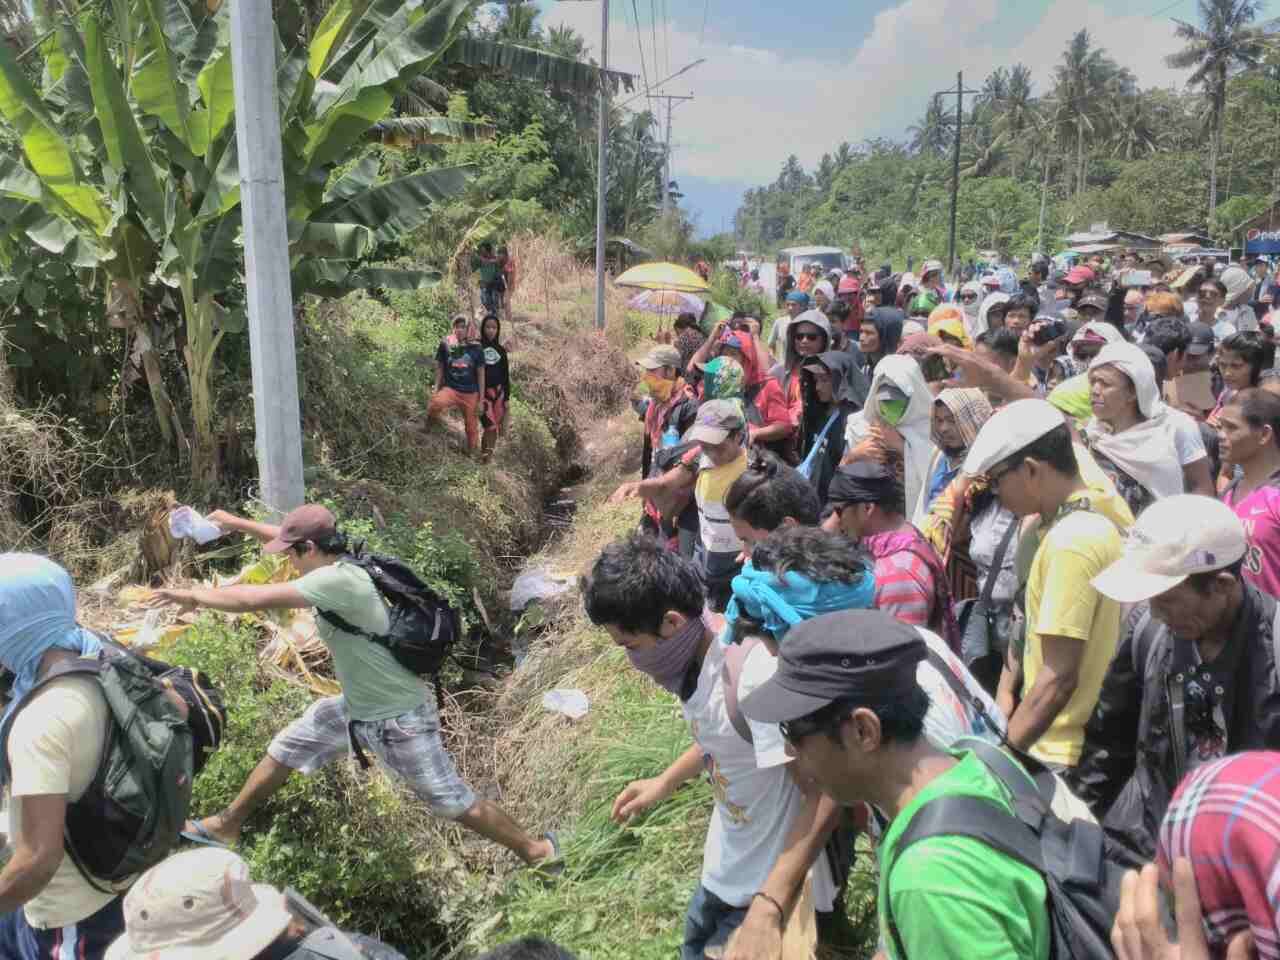 Farmers finally occupy parts of Lapanday-managed farm